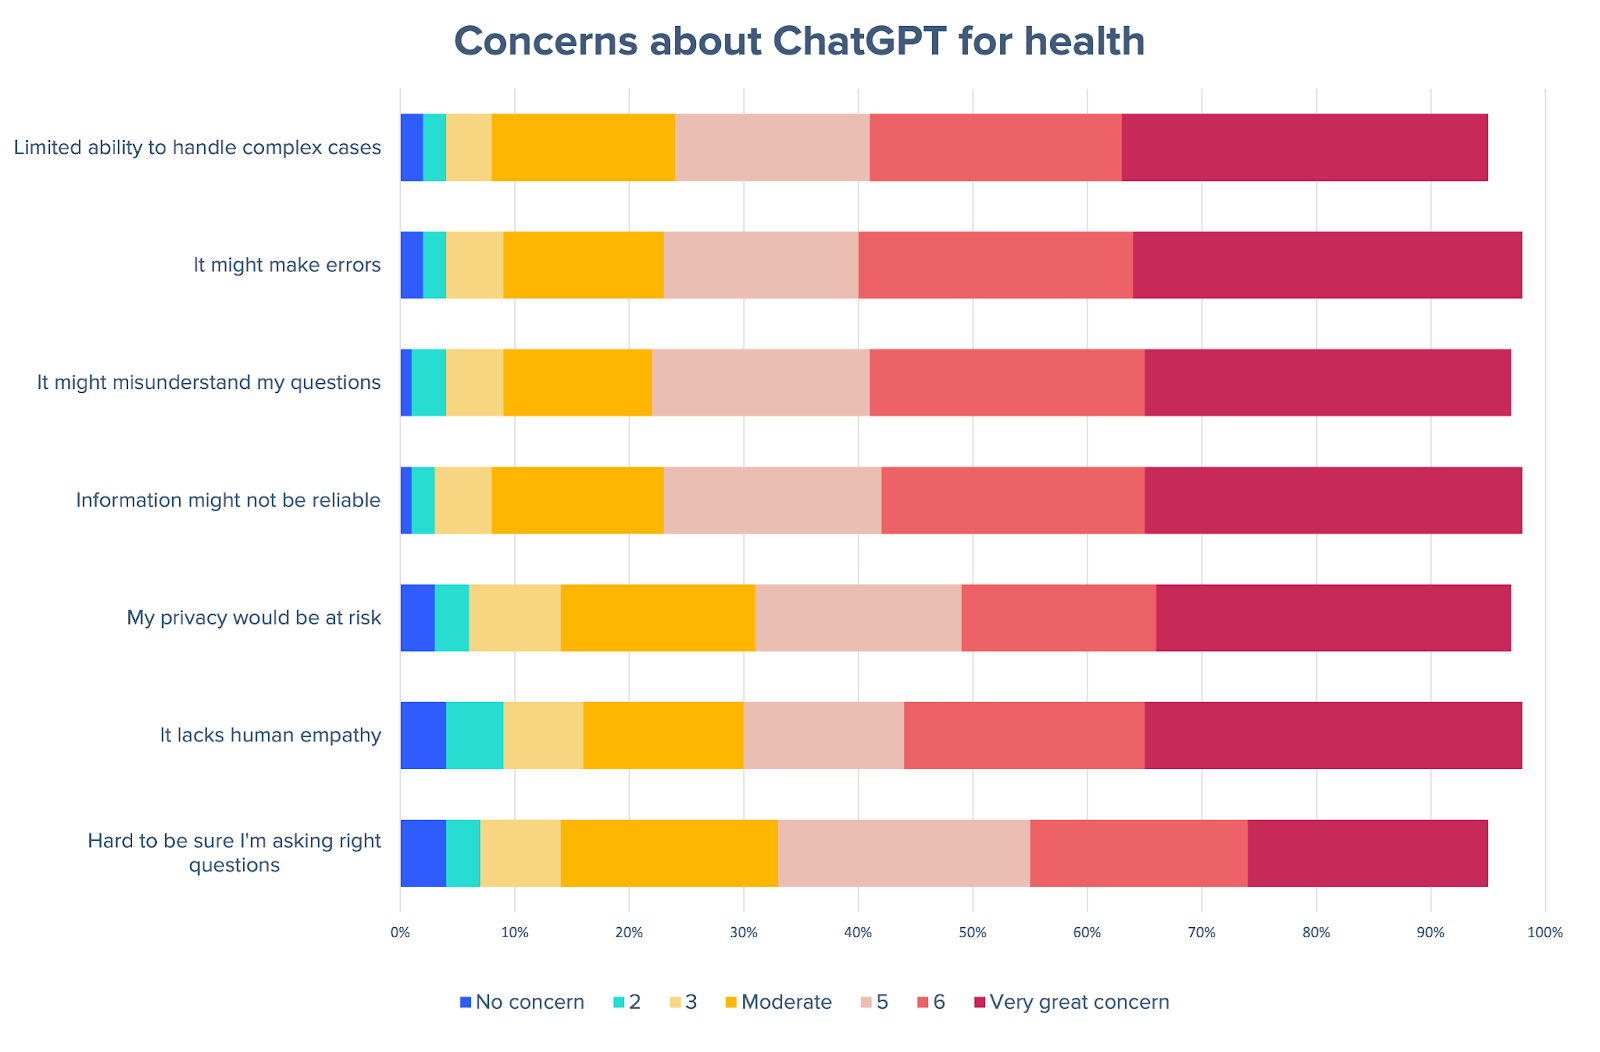 Chart rating concern levels over a variety of potential healthcare AI problems. Everything is rated as a moderate to very great concern, including fear of errors, fear of misunderstandings, and concerns that information may not be reliable.